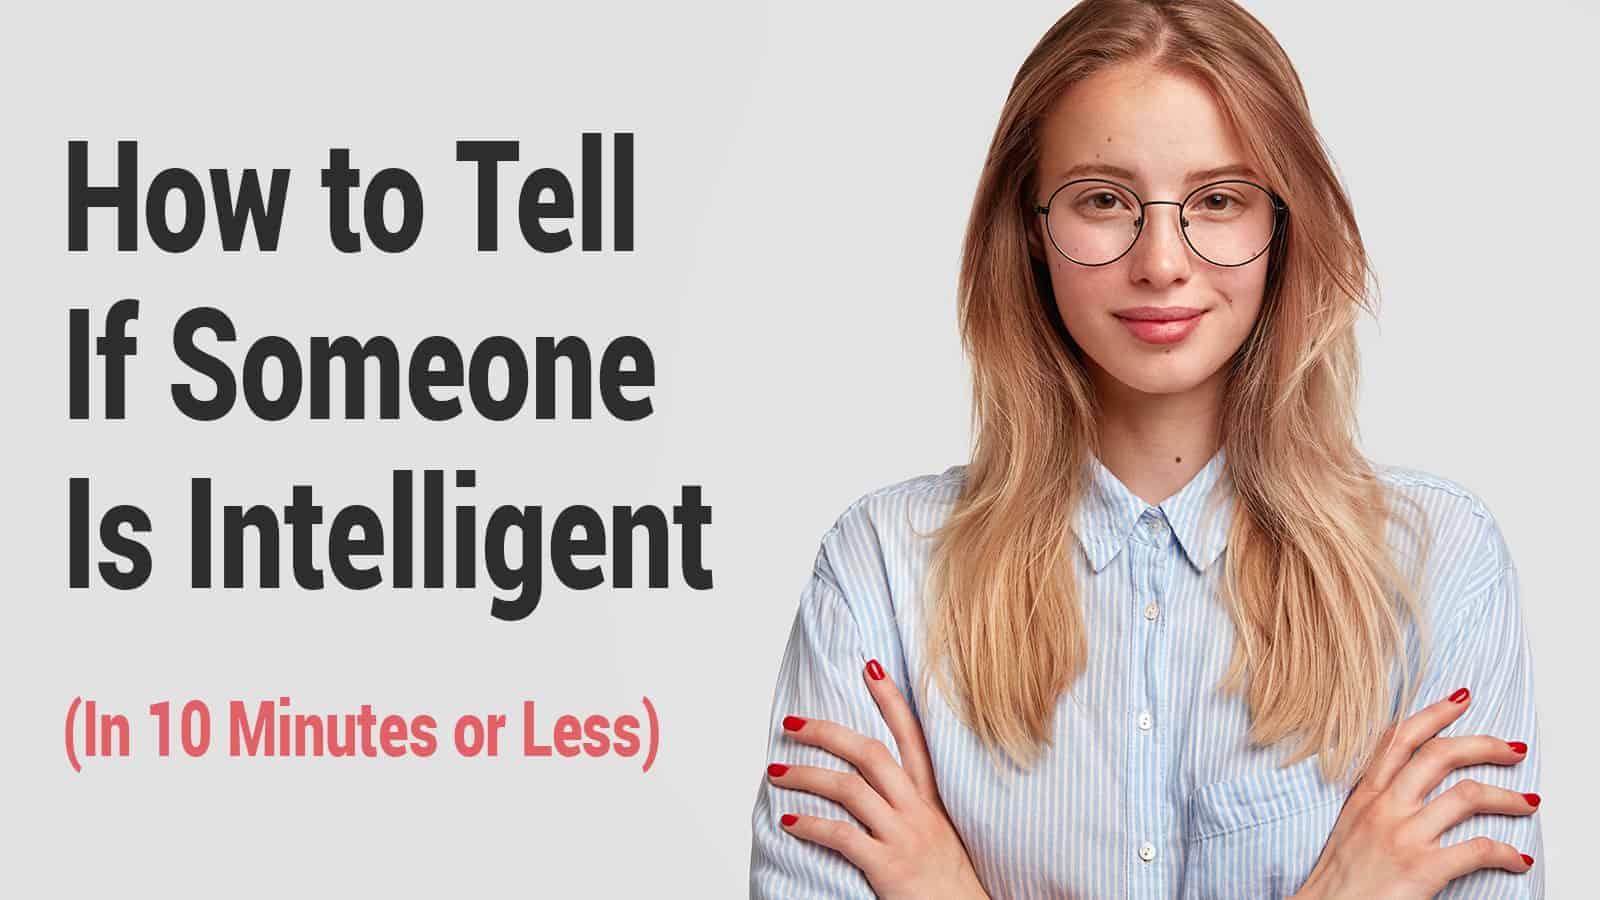 How to Tell If Someone Is Intelligent (In 10 Minutes or Less)